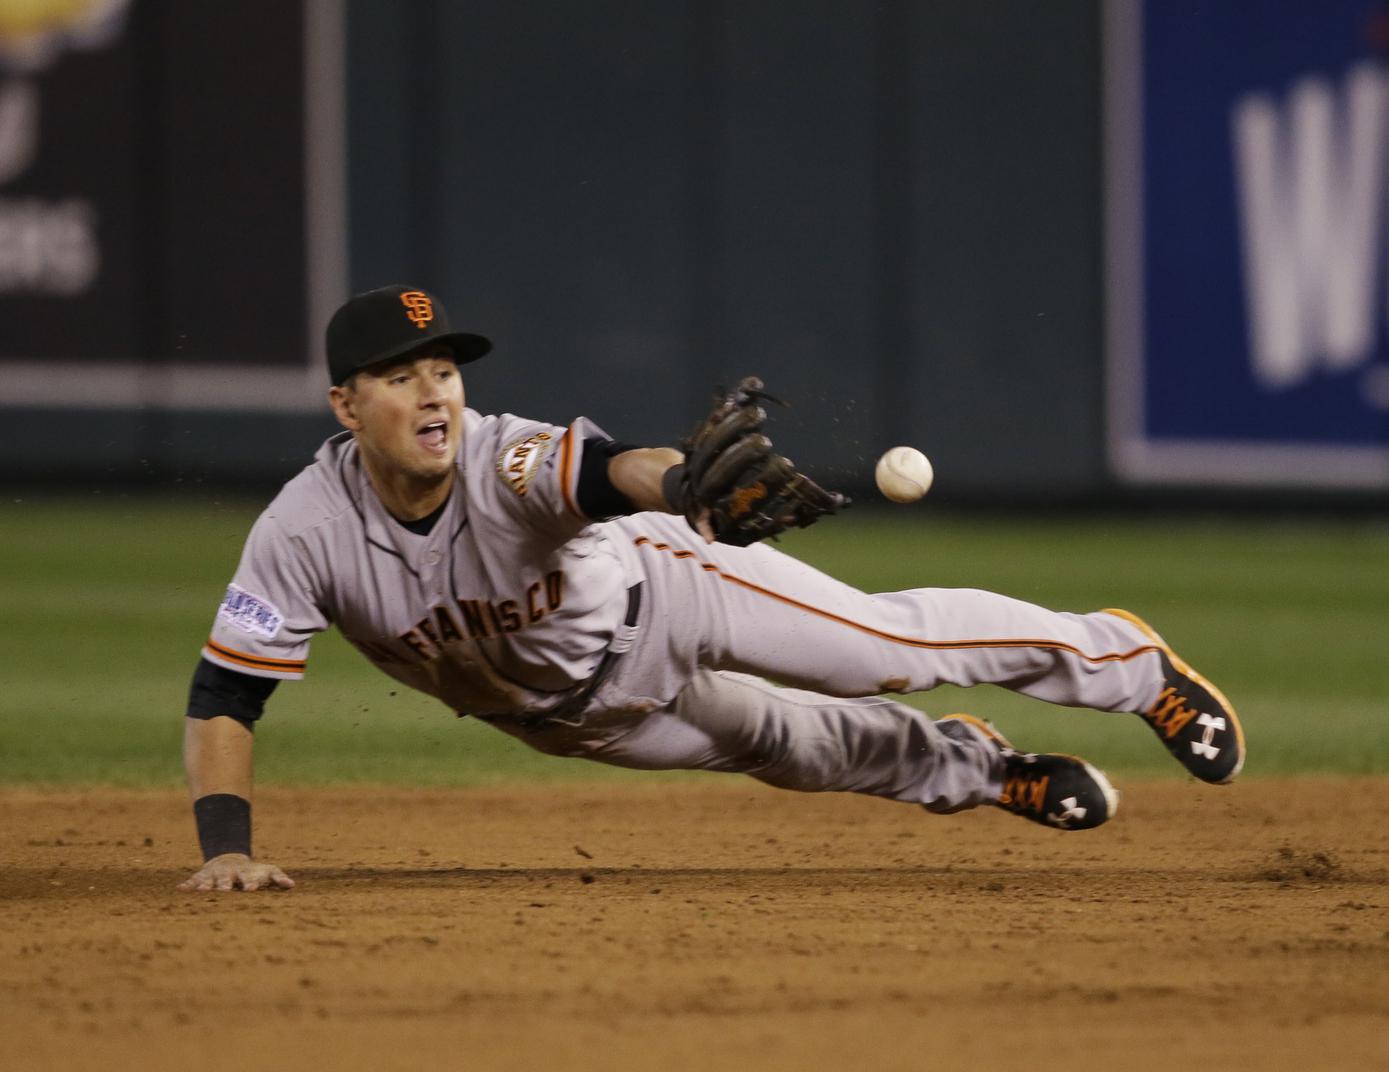 San Francisco Giants will give Panik a try at second base – The